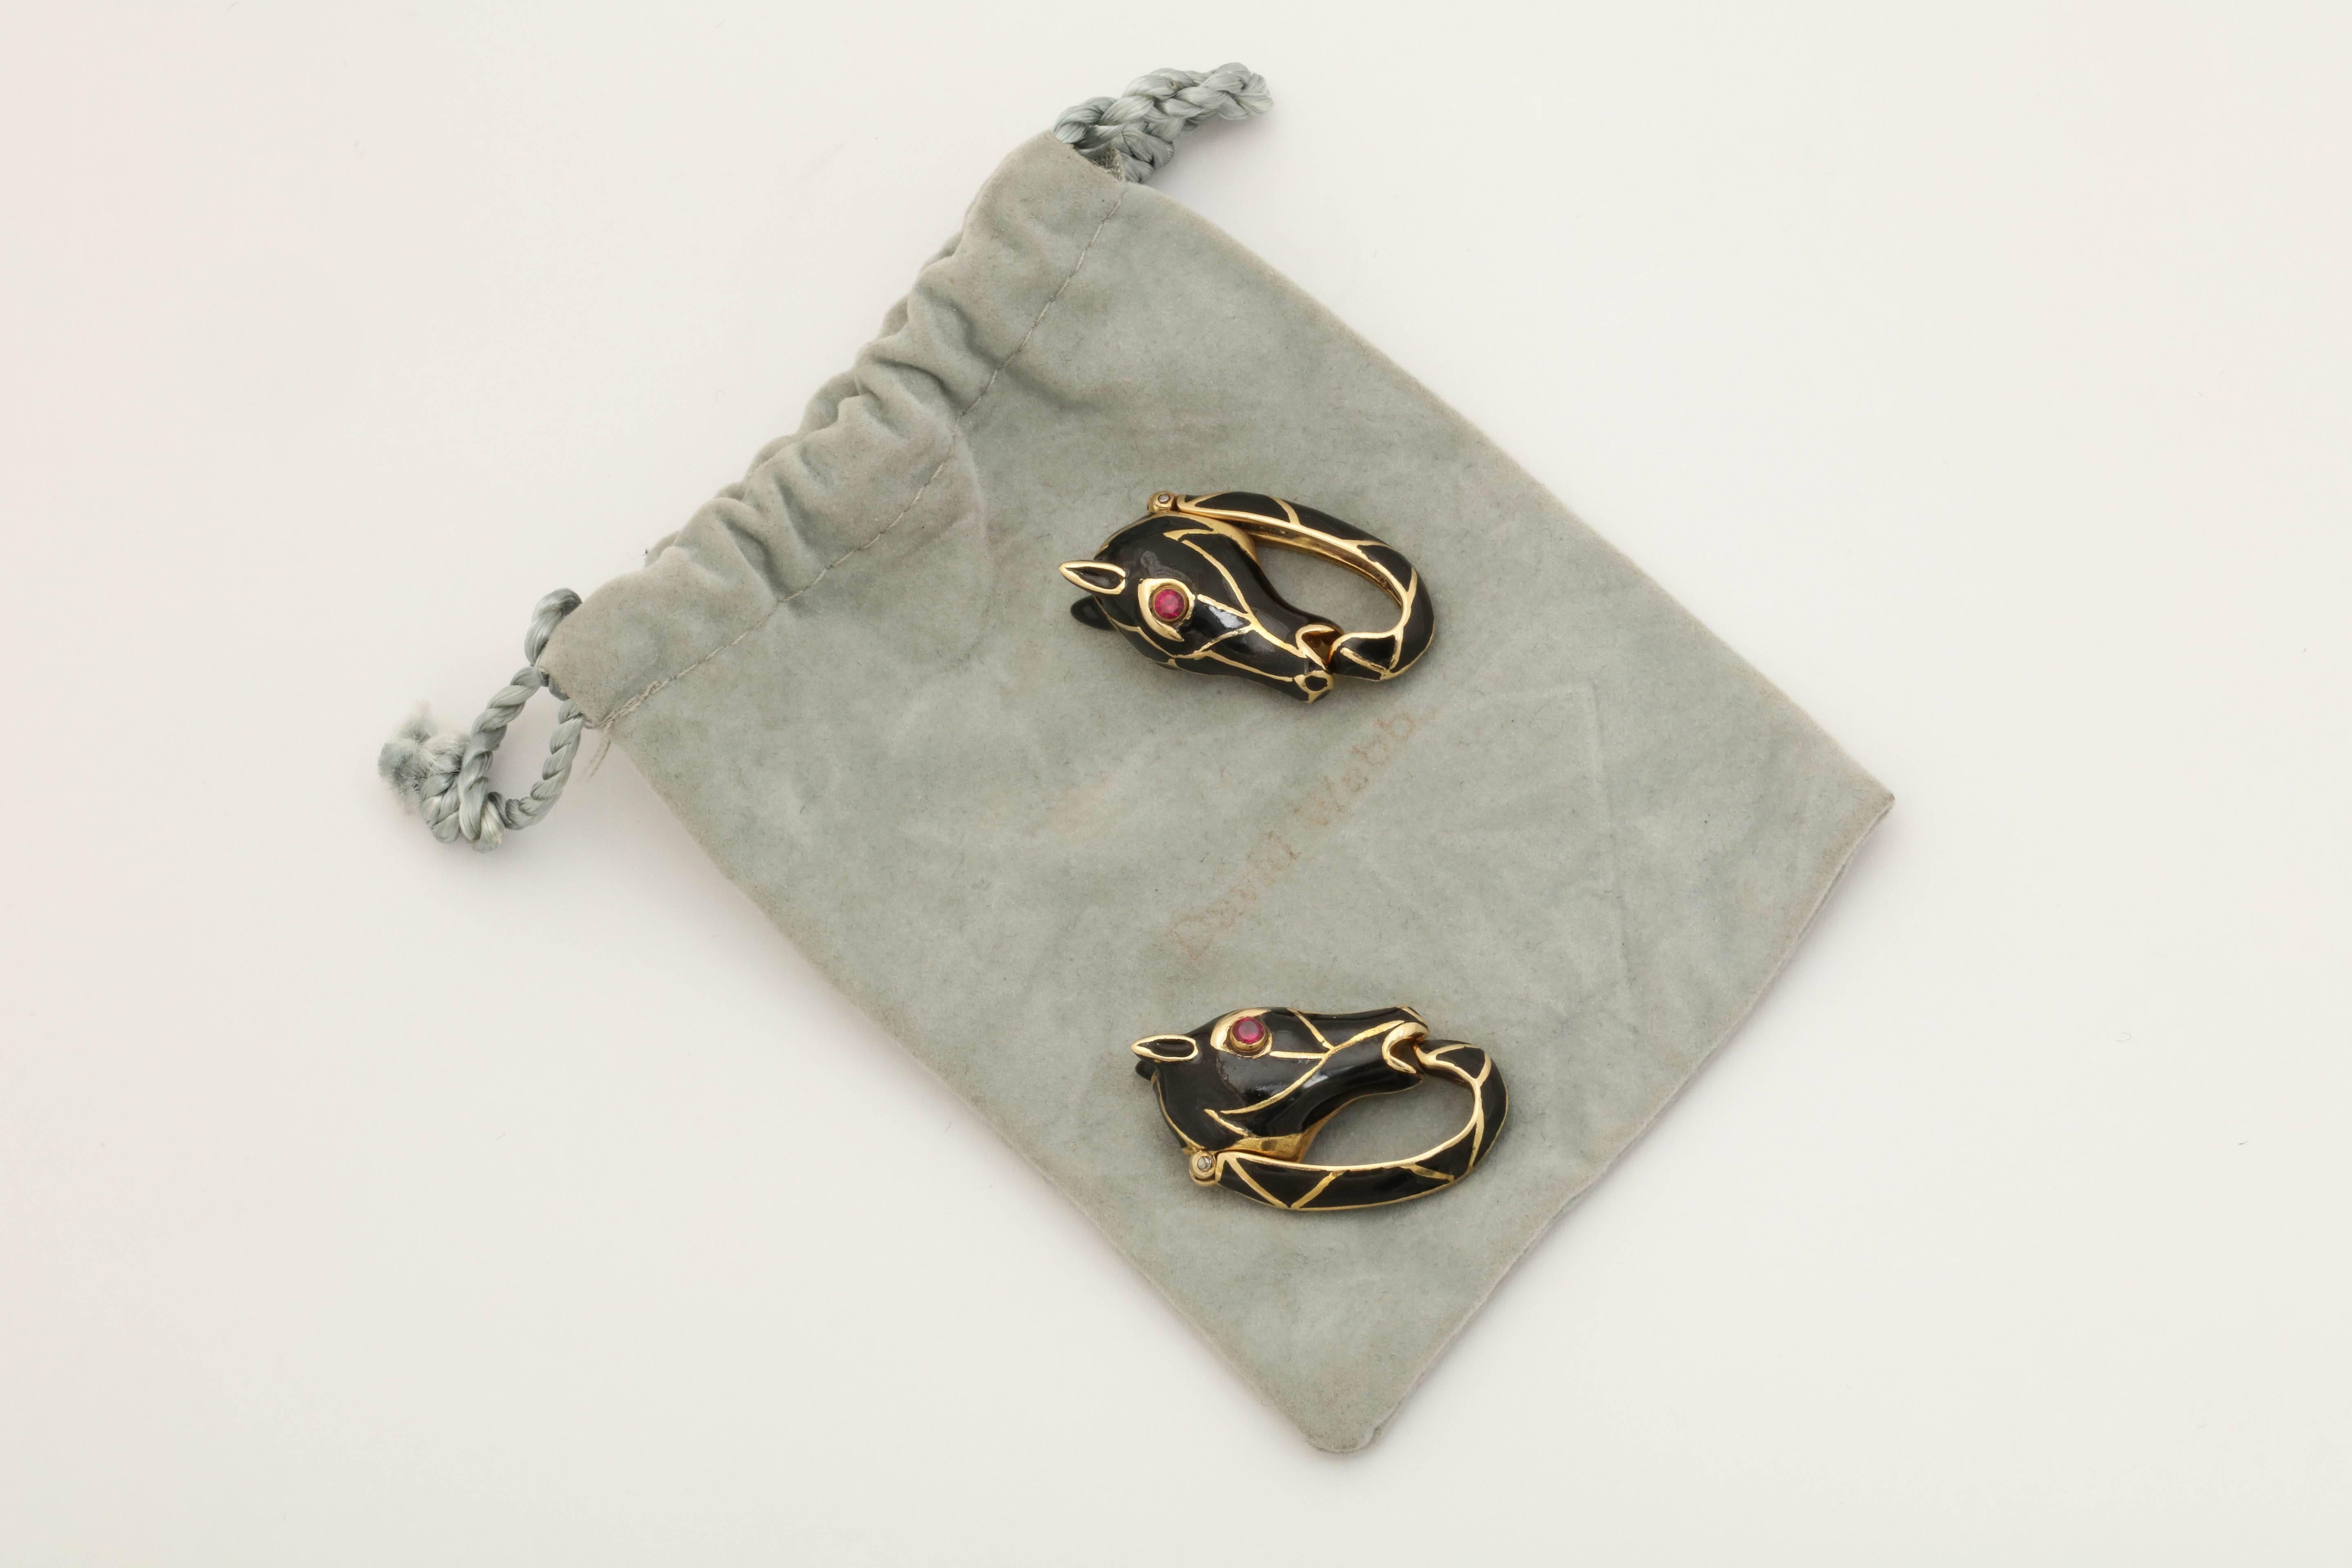 One Pair Of Gentlemen's Black Steel Enamel Hematite Color Horse Cufflinks Created By David Webb In The 1960's. Note Rubies For Horses Eyes.Created In 18kt Yellow Gold.